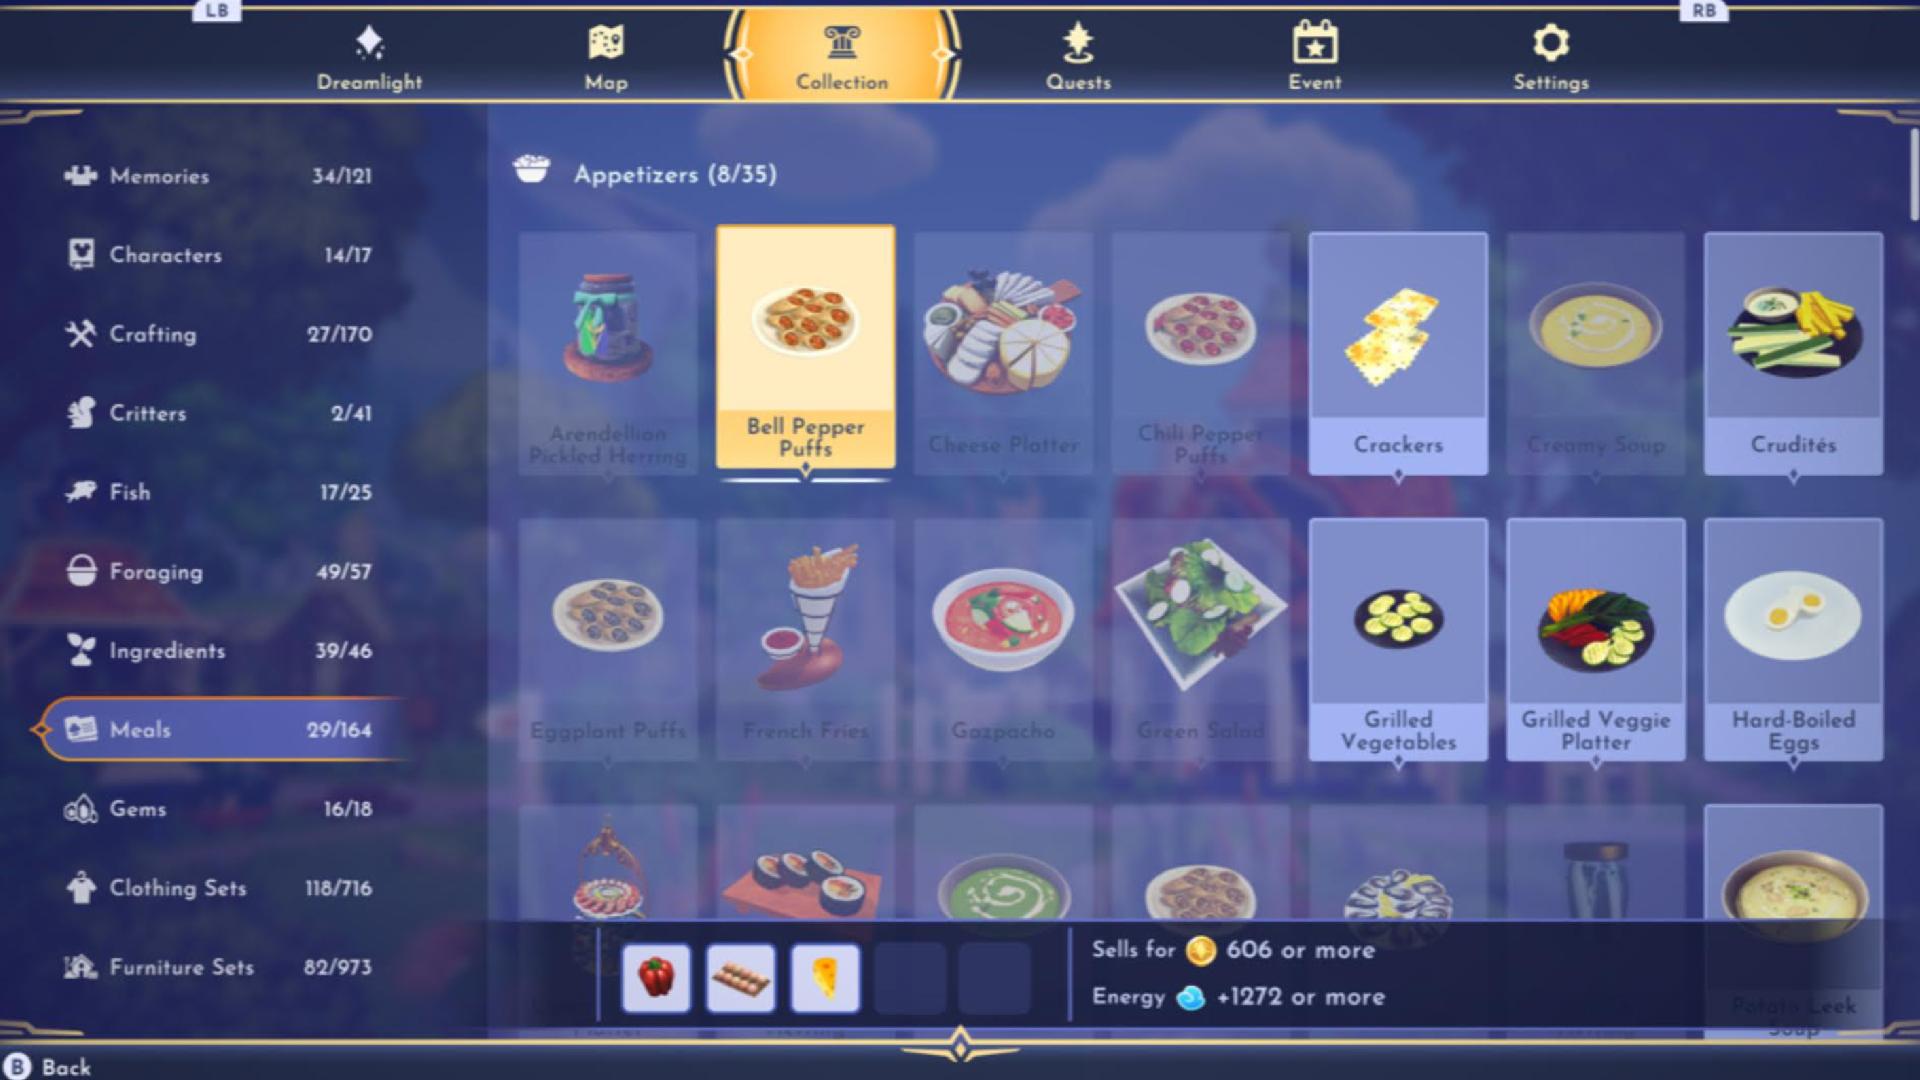 Disney Dreamlight Valley Kitchen Explaiend: A list of recipes can be seen